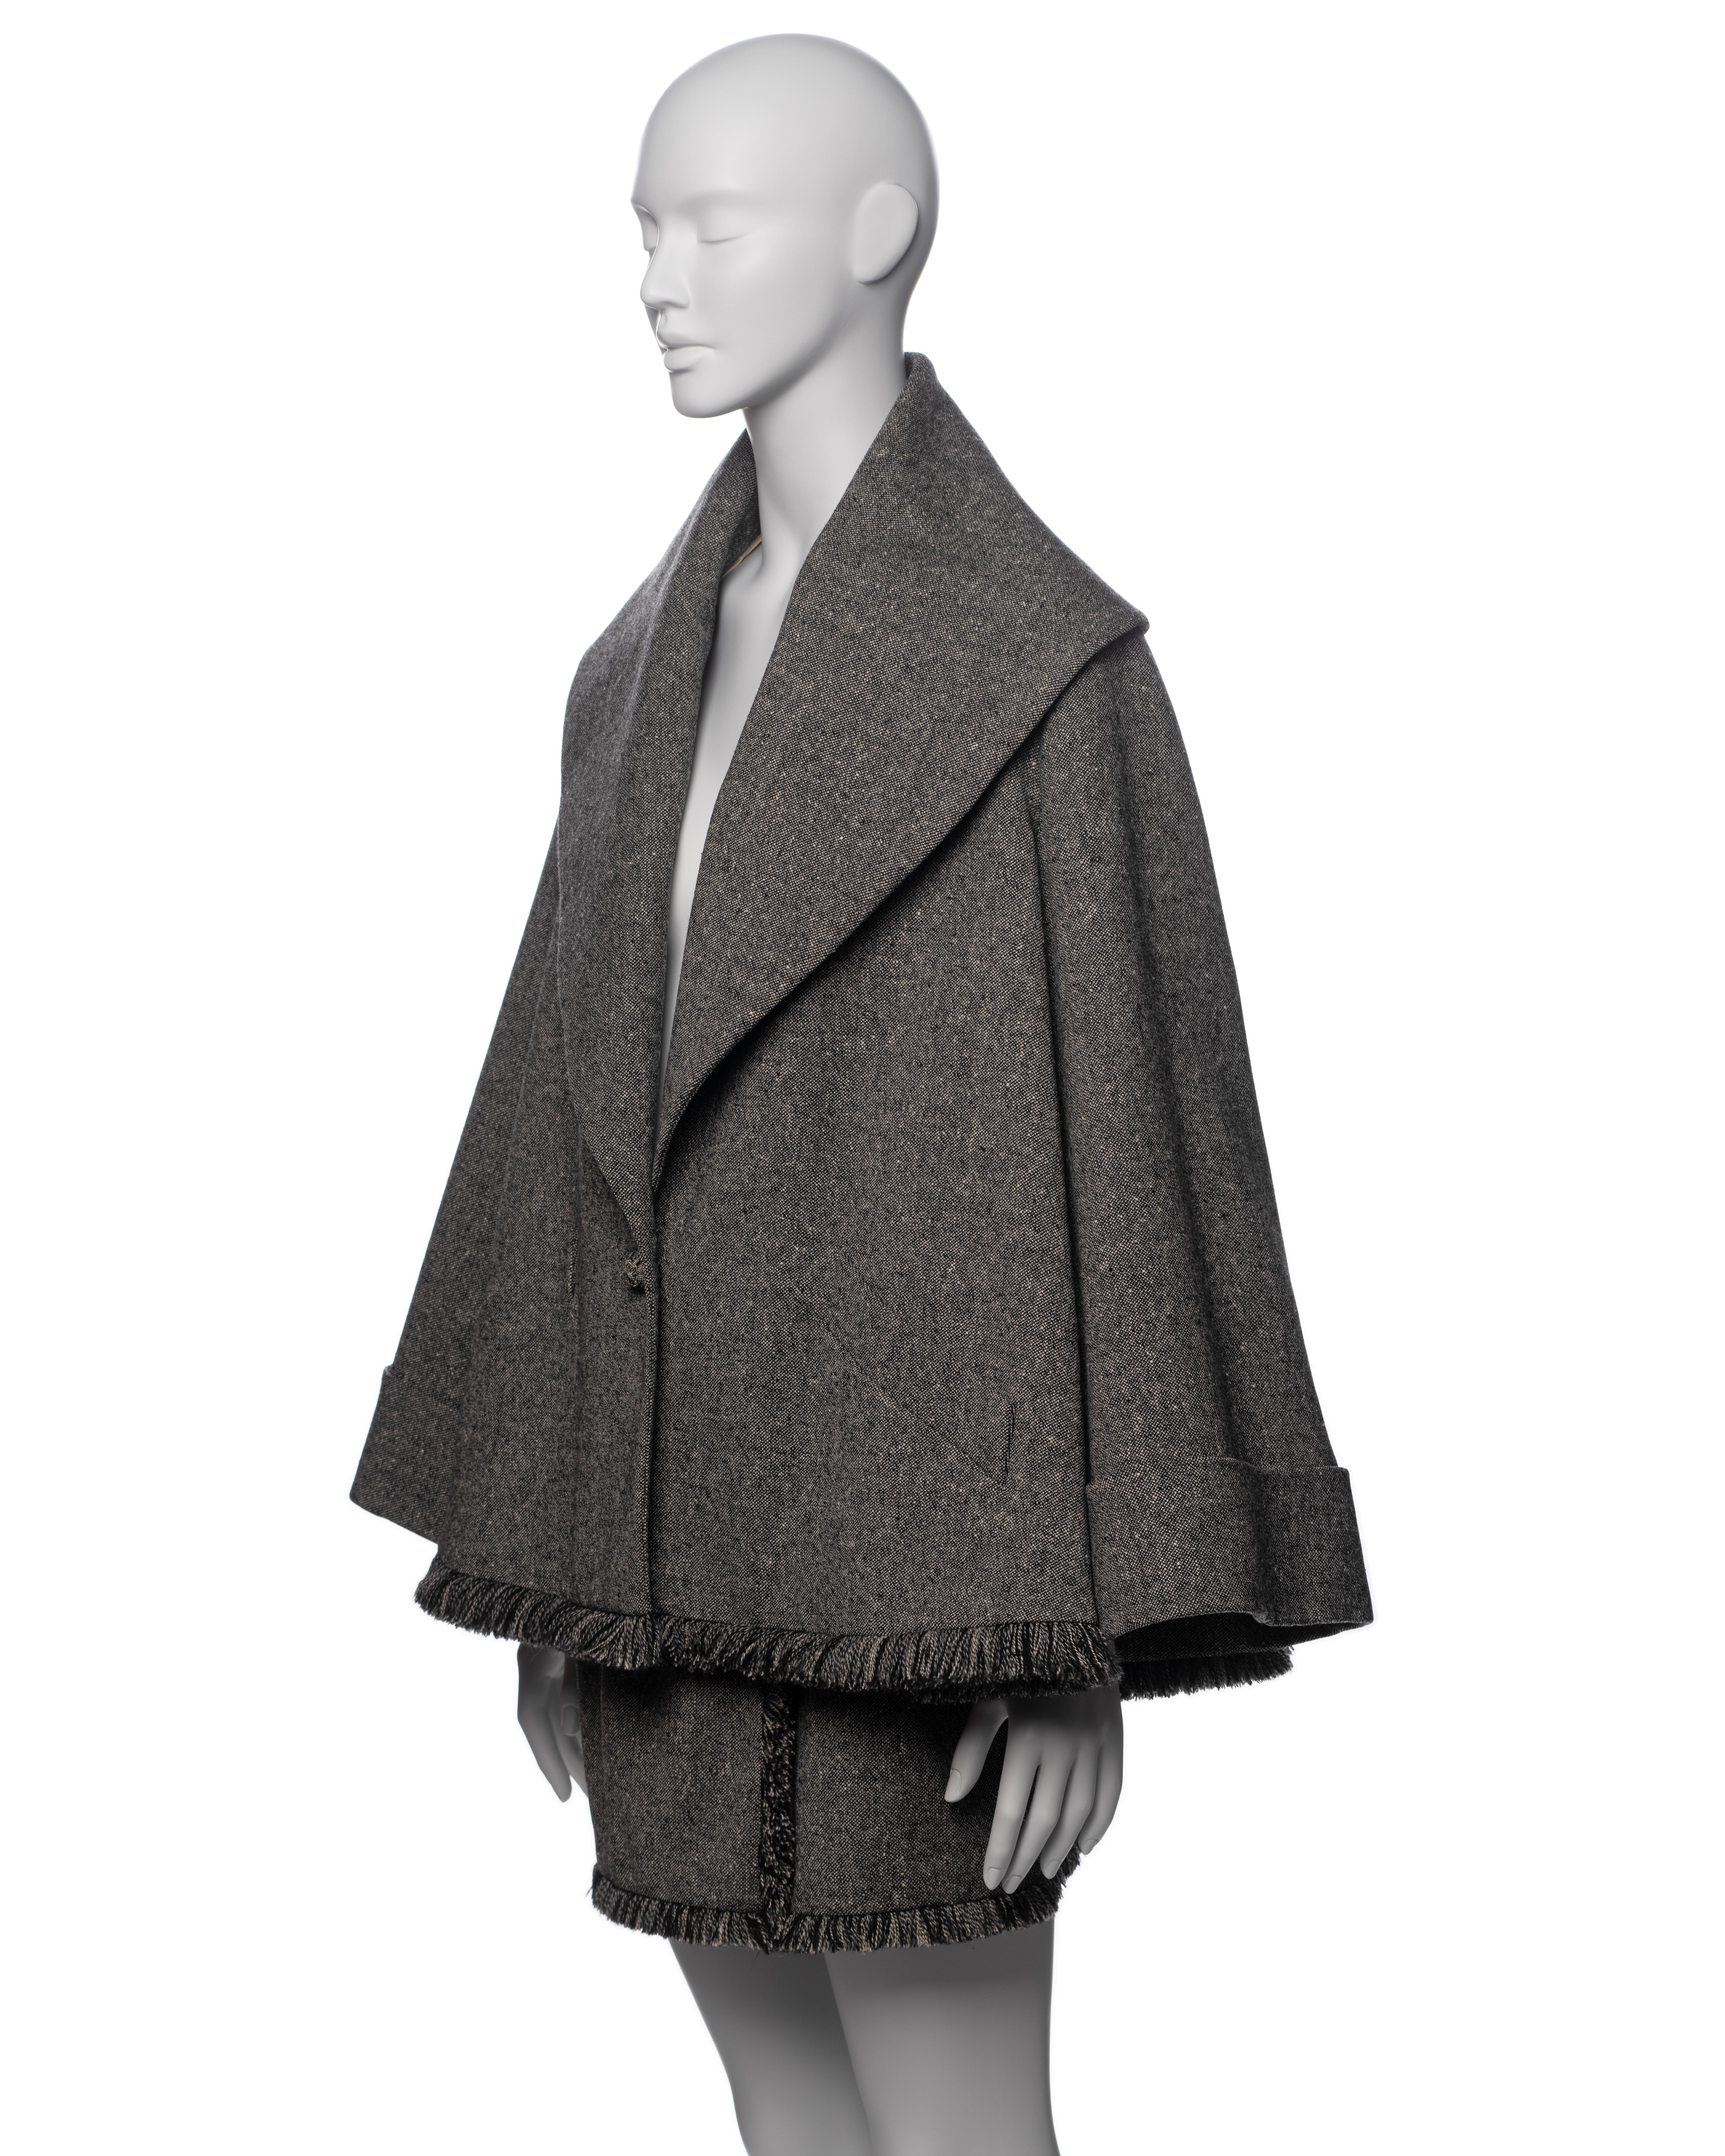 Christian Dior by John Galliano Grey Tweed Jacket and Mini Skirt Suit, FW 1998 For Sale 2